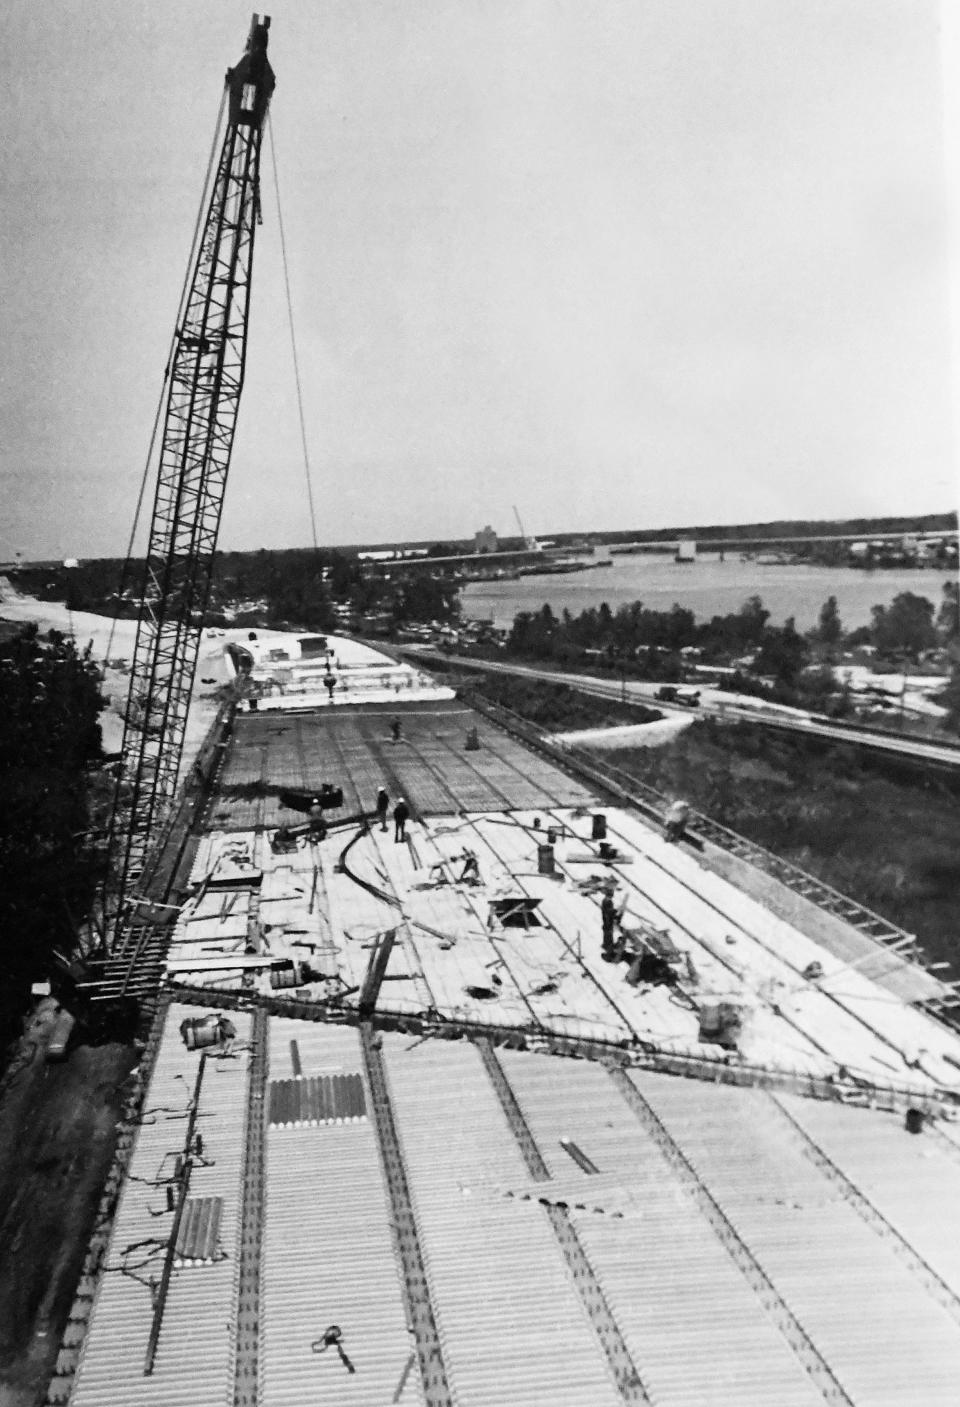 A view from a crane bucket show how work continues on what is now the S Thomas Rhodes Bridge along Hwy 421 in Wilmington, N.C. on May 16, 1984. [STARNEWS/JACK UPTON]